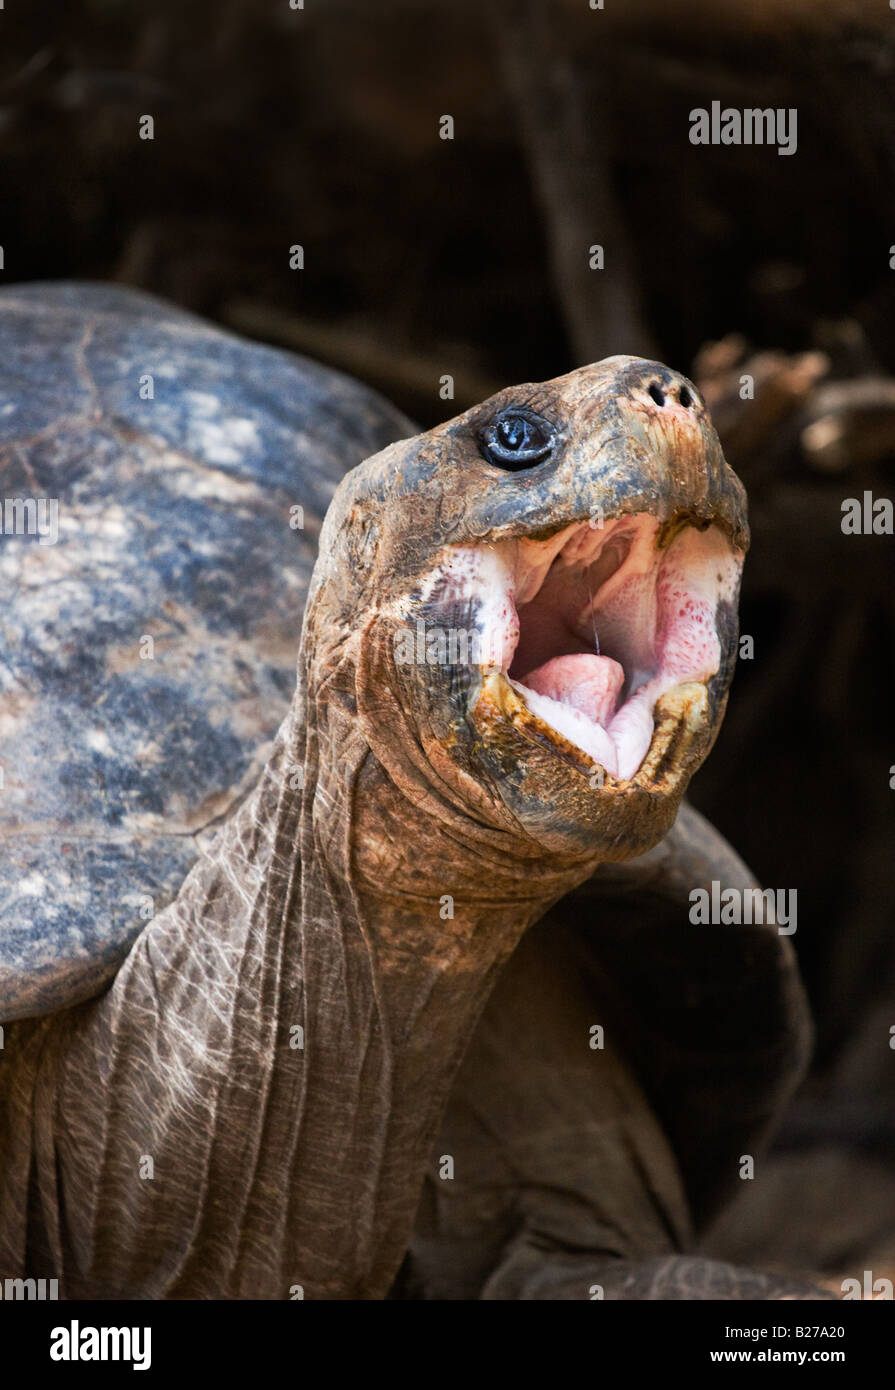 A giant tortoise yawning aggressively in the Galapagos Islands Stock Photo